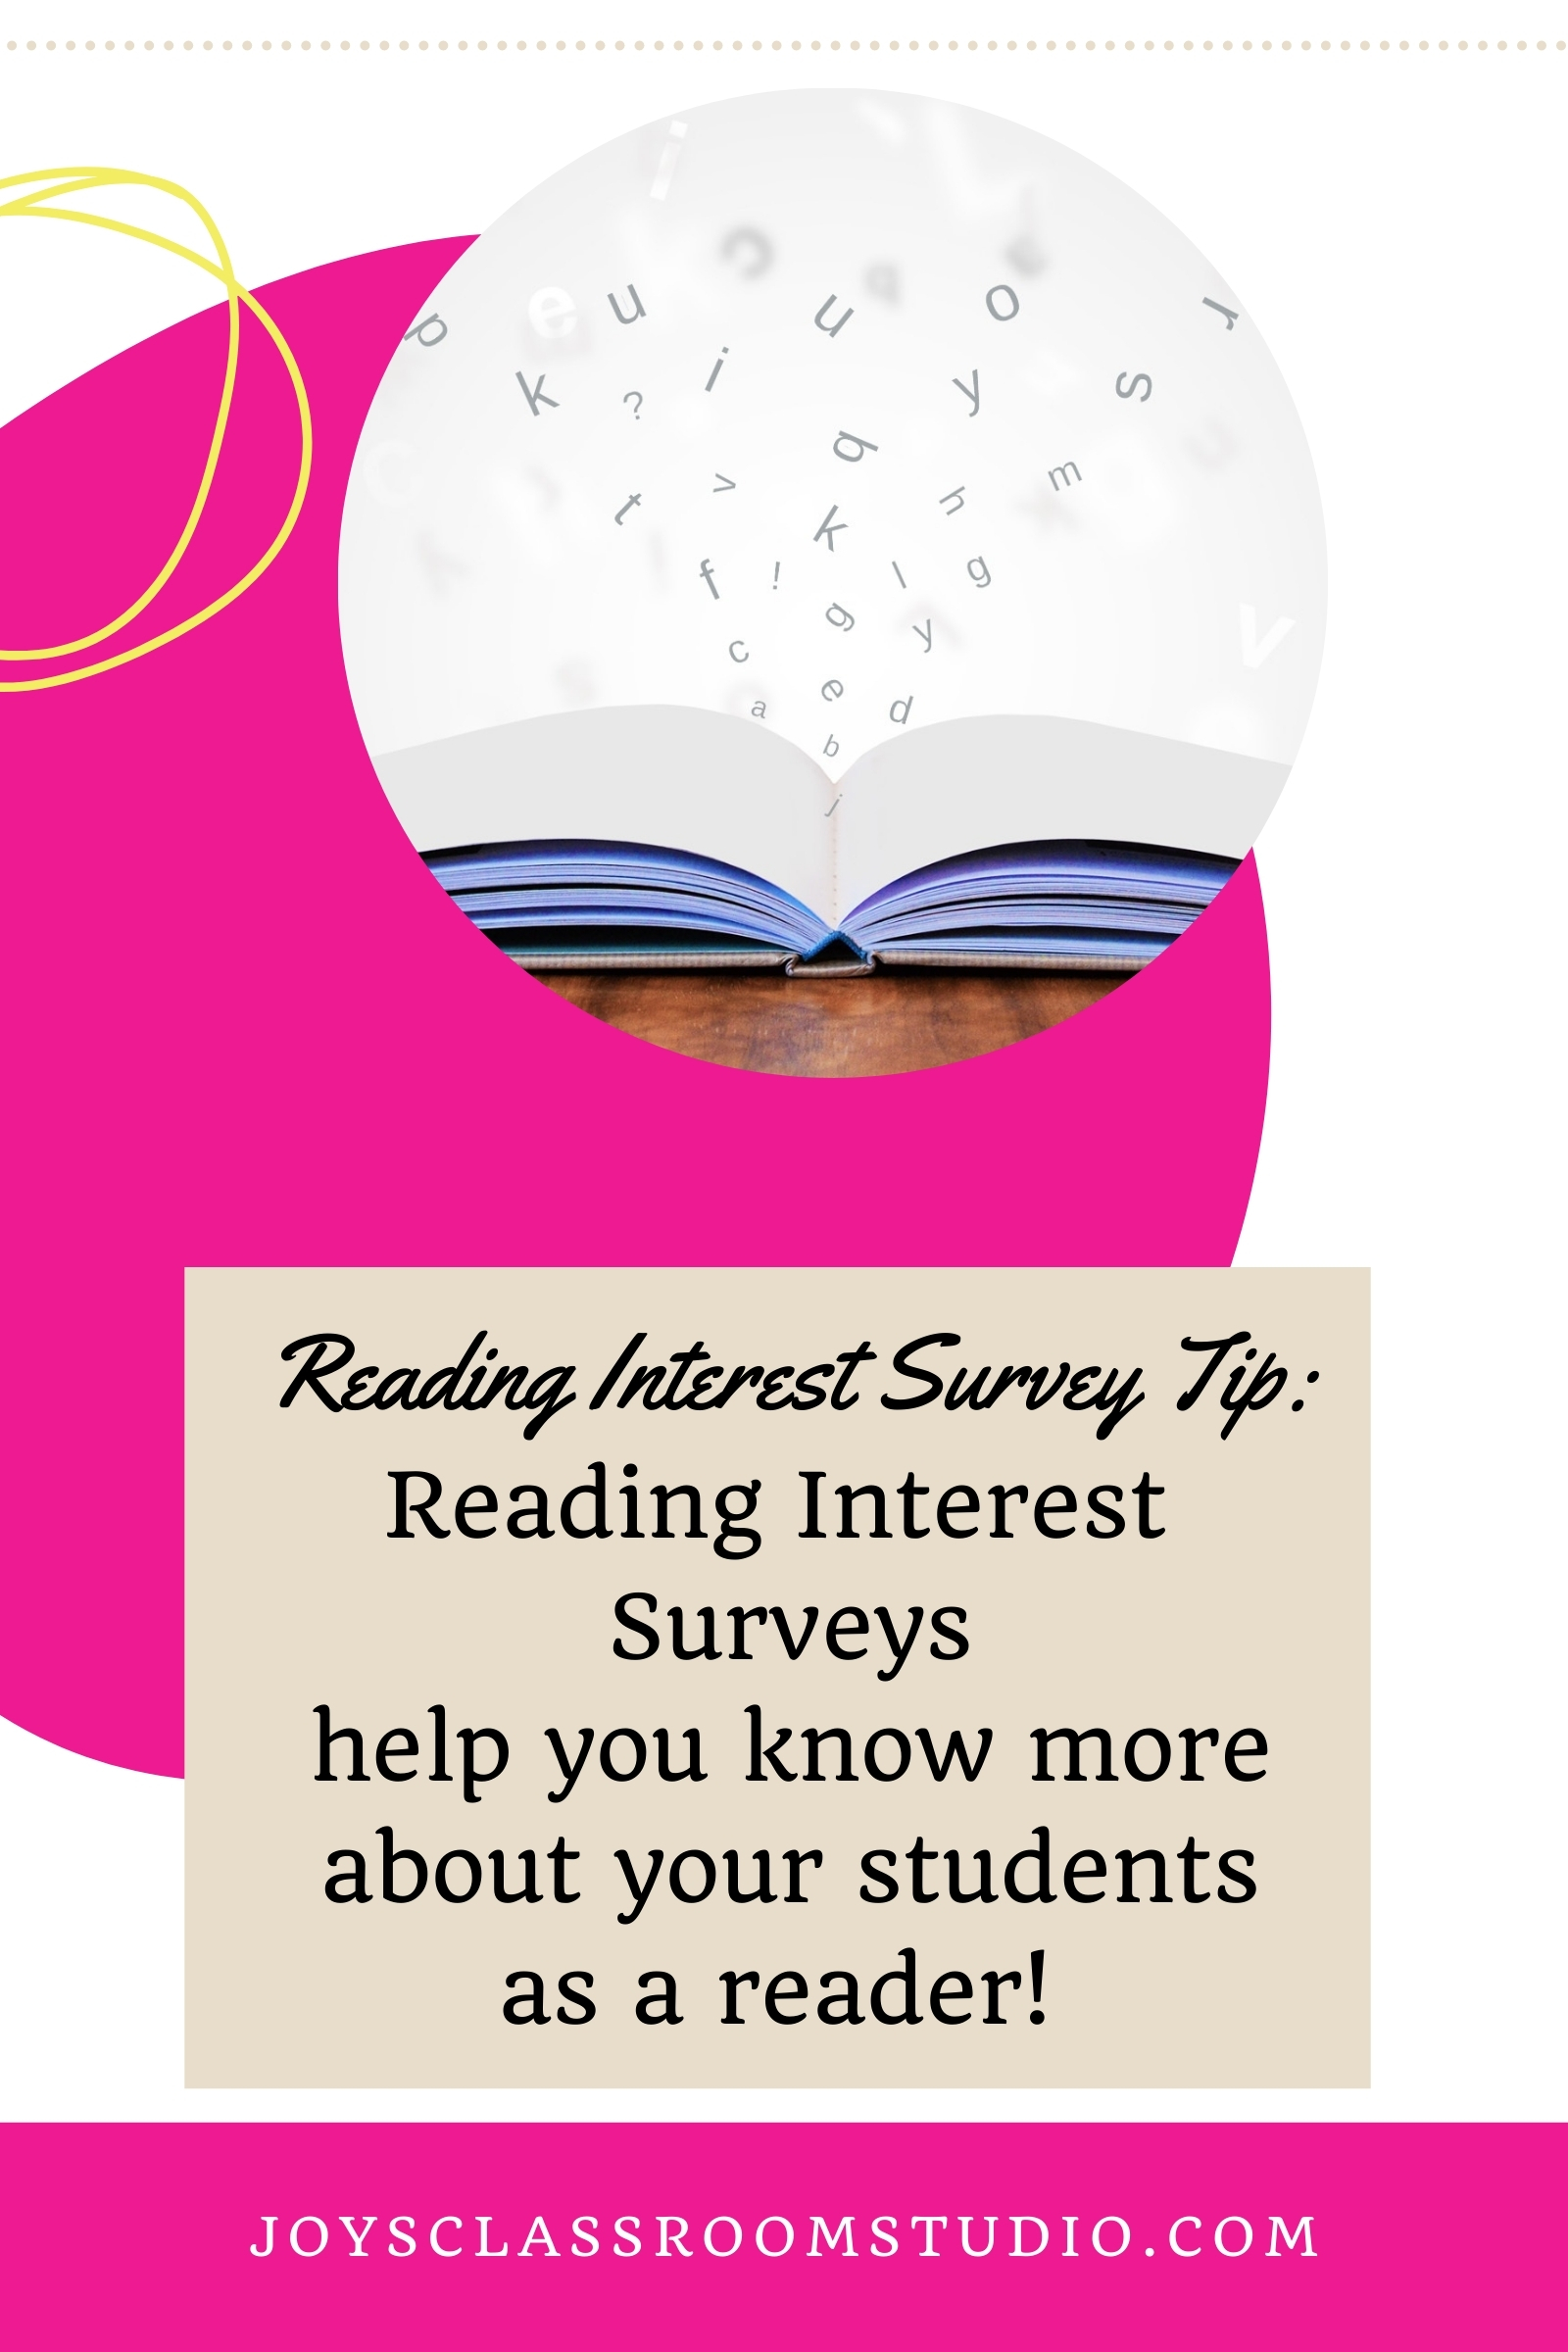 Reading Interest Surveys help you learn more about your students!